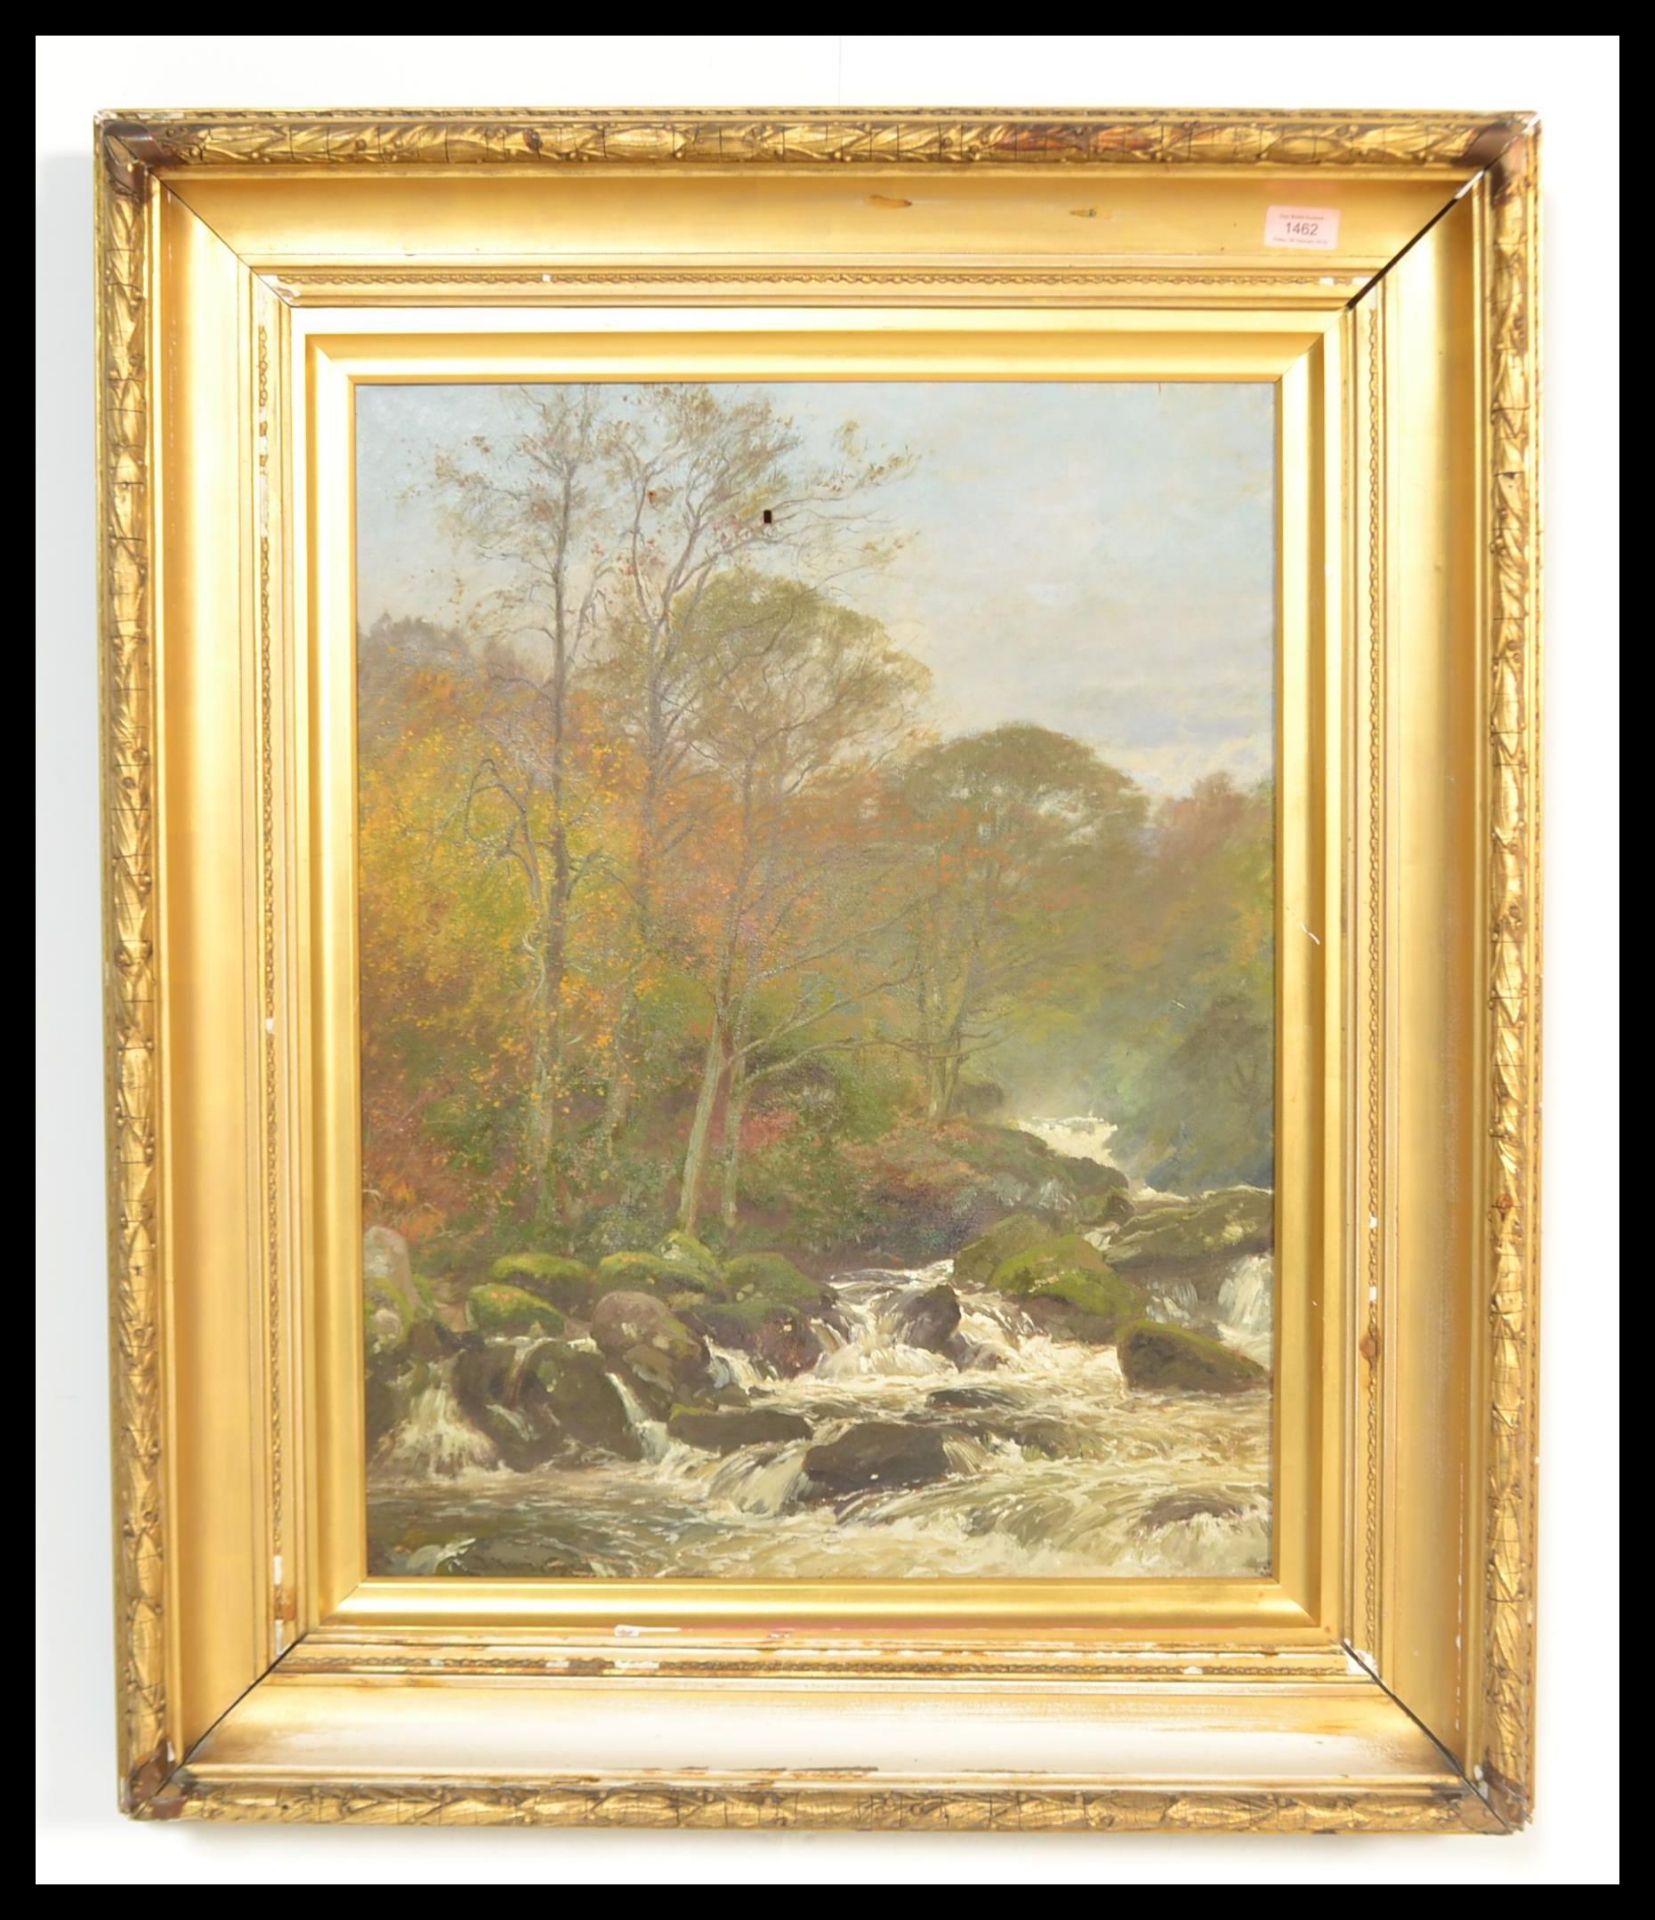 A 20th Century painting on canvas depicting a winter woodland scene with a river flowing over